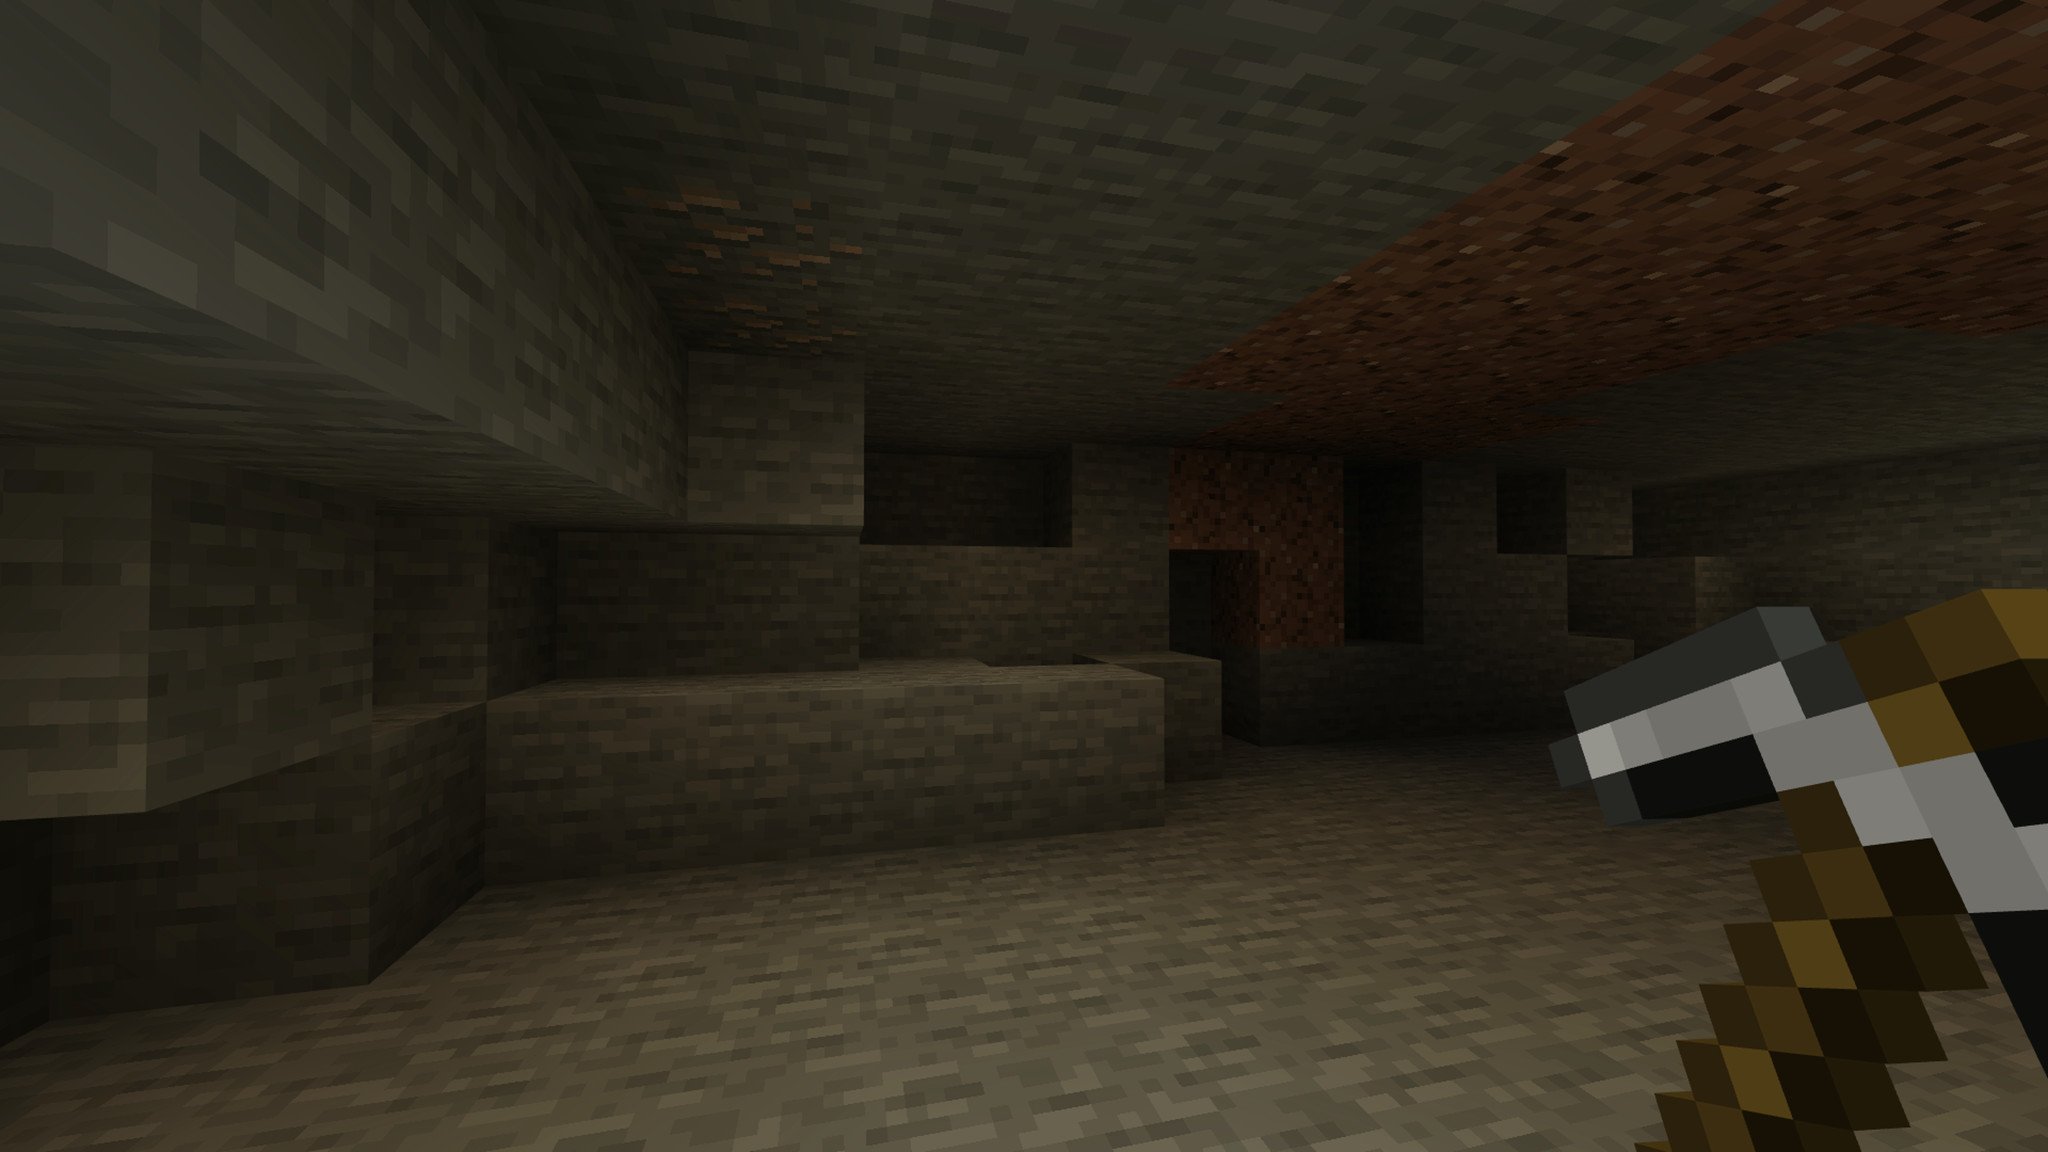 The beginnings of a strip mine